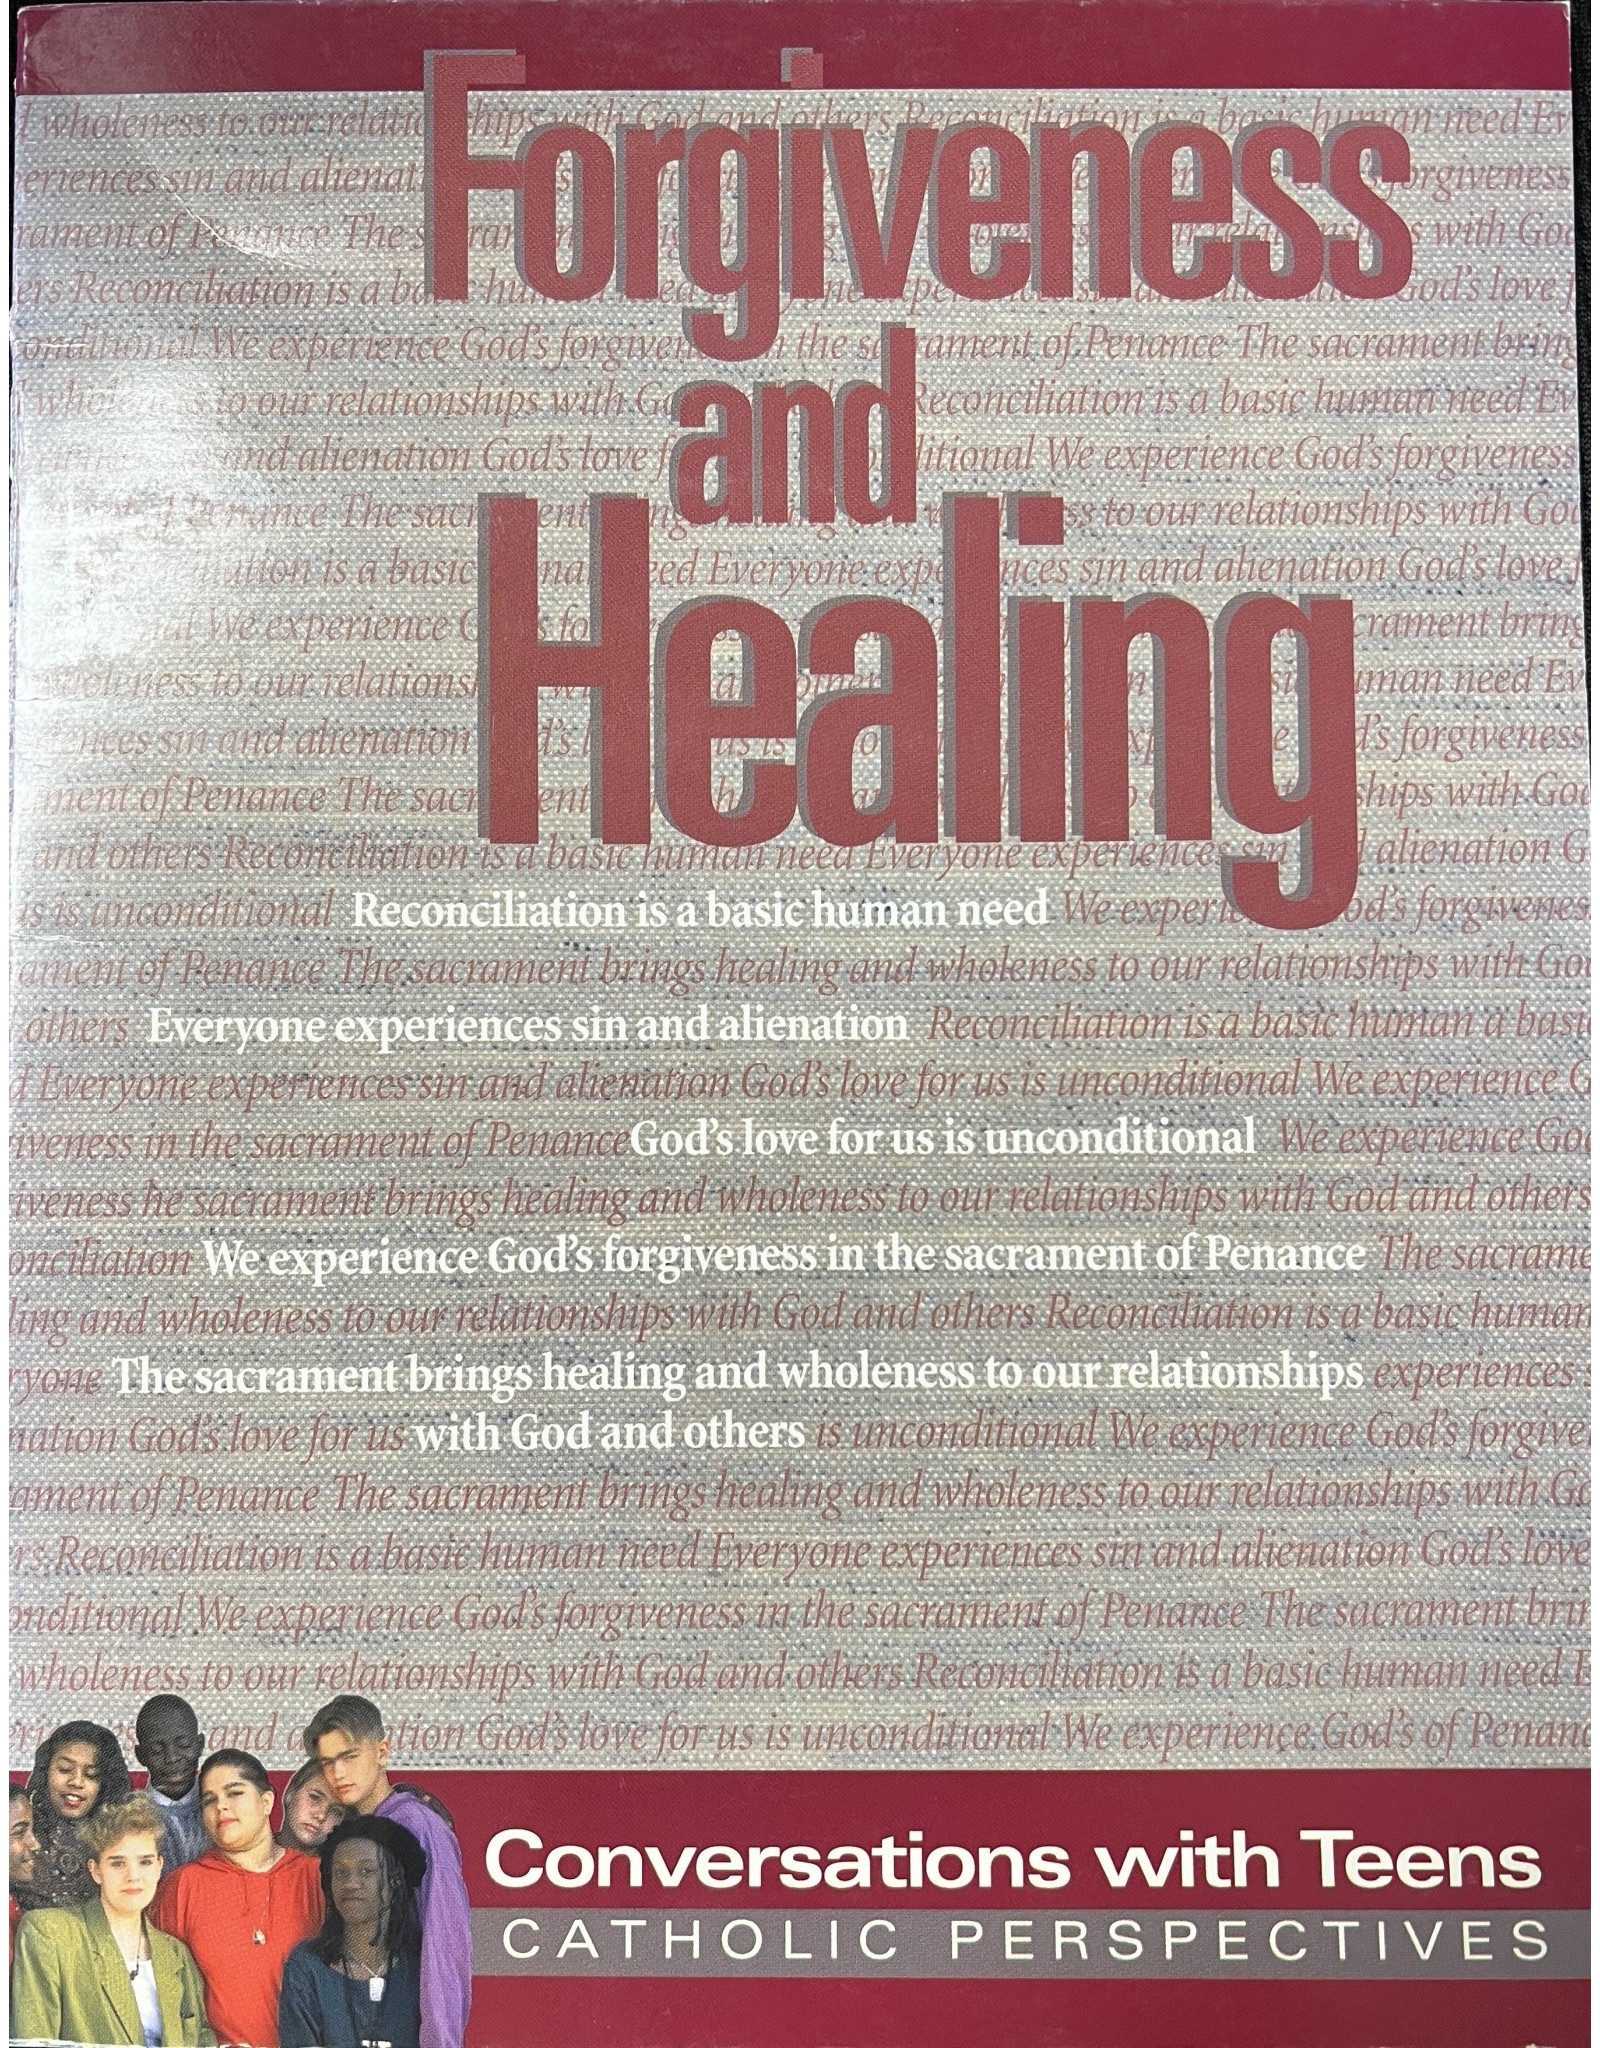 Pflaum Forgiveness & Healing (Conversations with Teens: Catholic Perspectives)